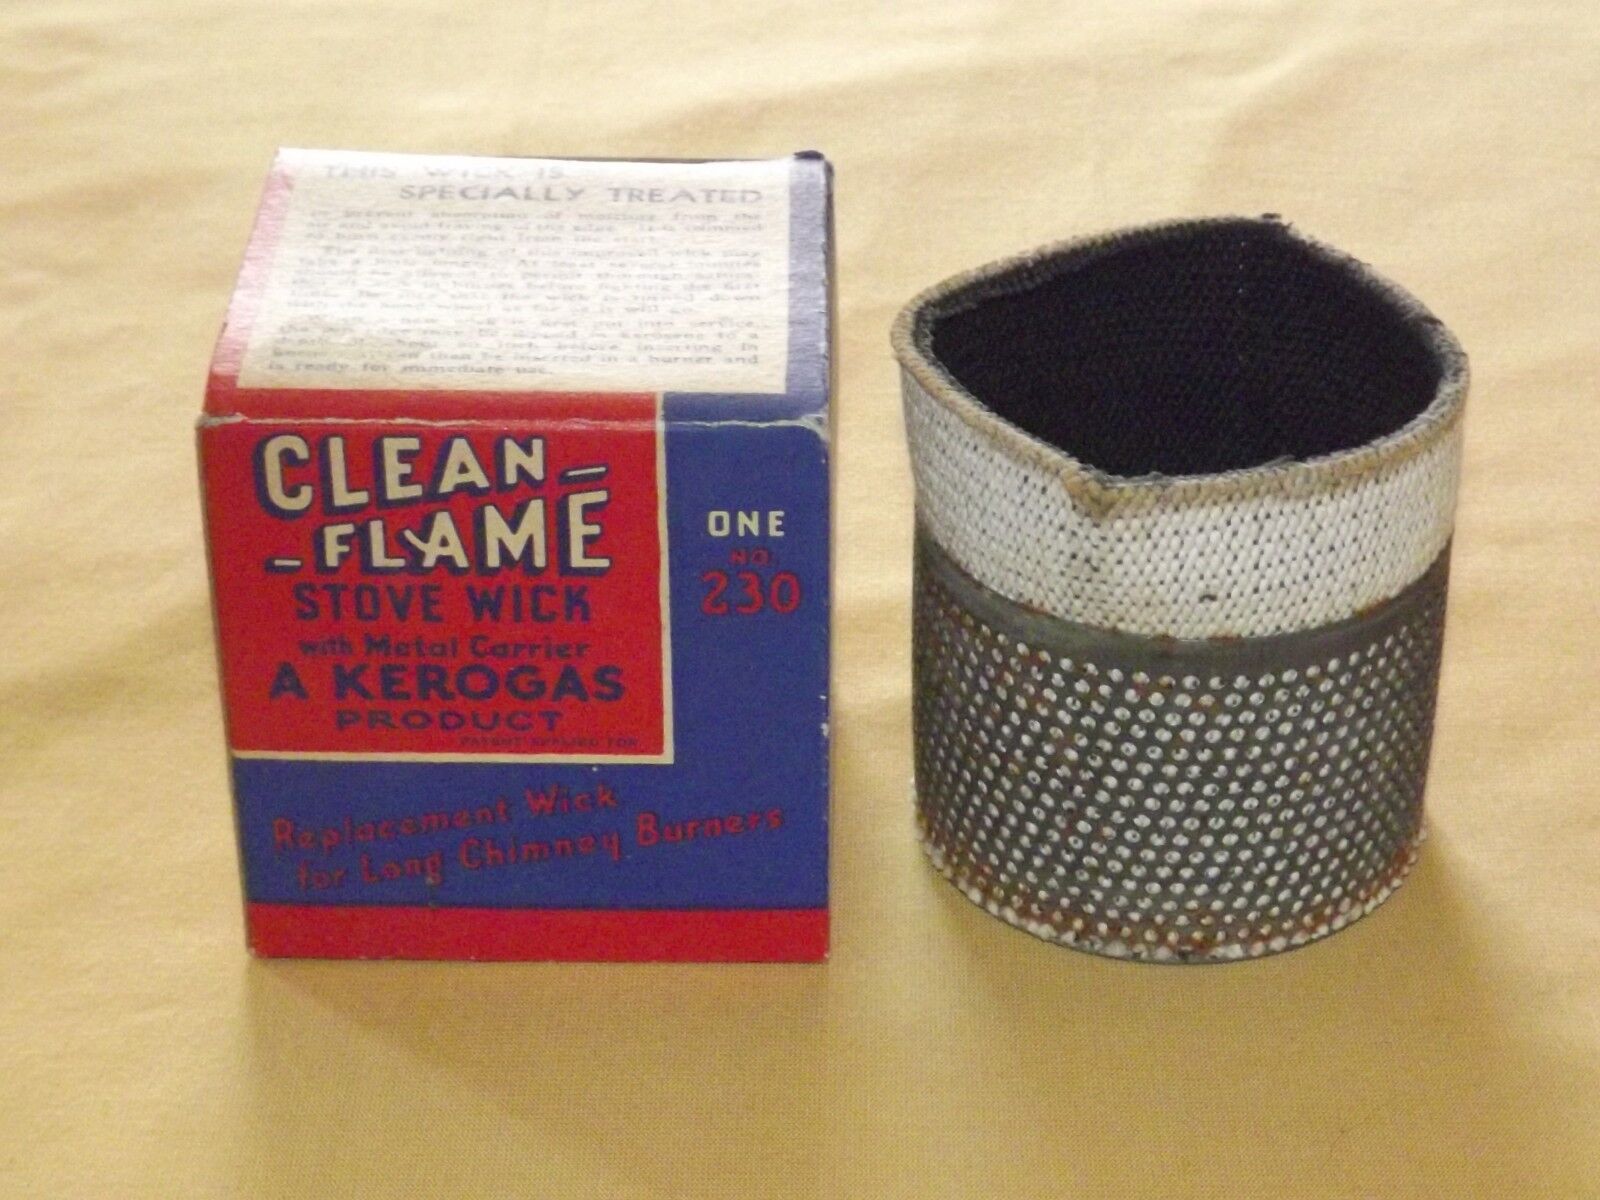 VINTAGE CHIMNEY BURNERS KEROGAS CLEAN FLAME STOVE WICK NO. 230 NOS NEW IN BOX